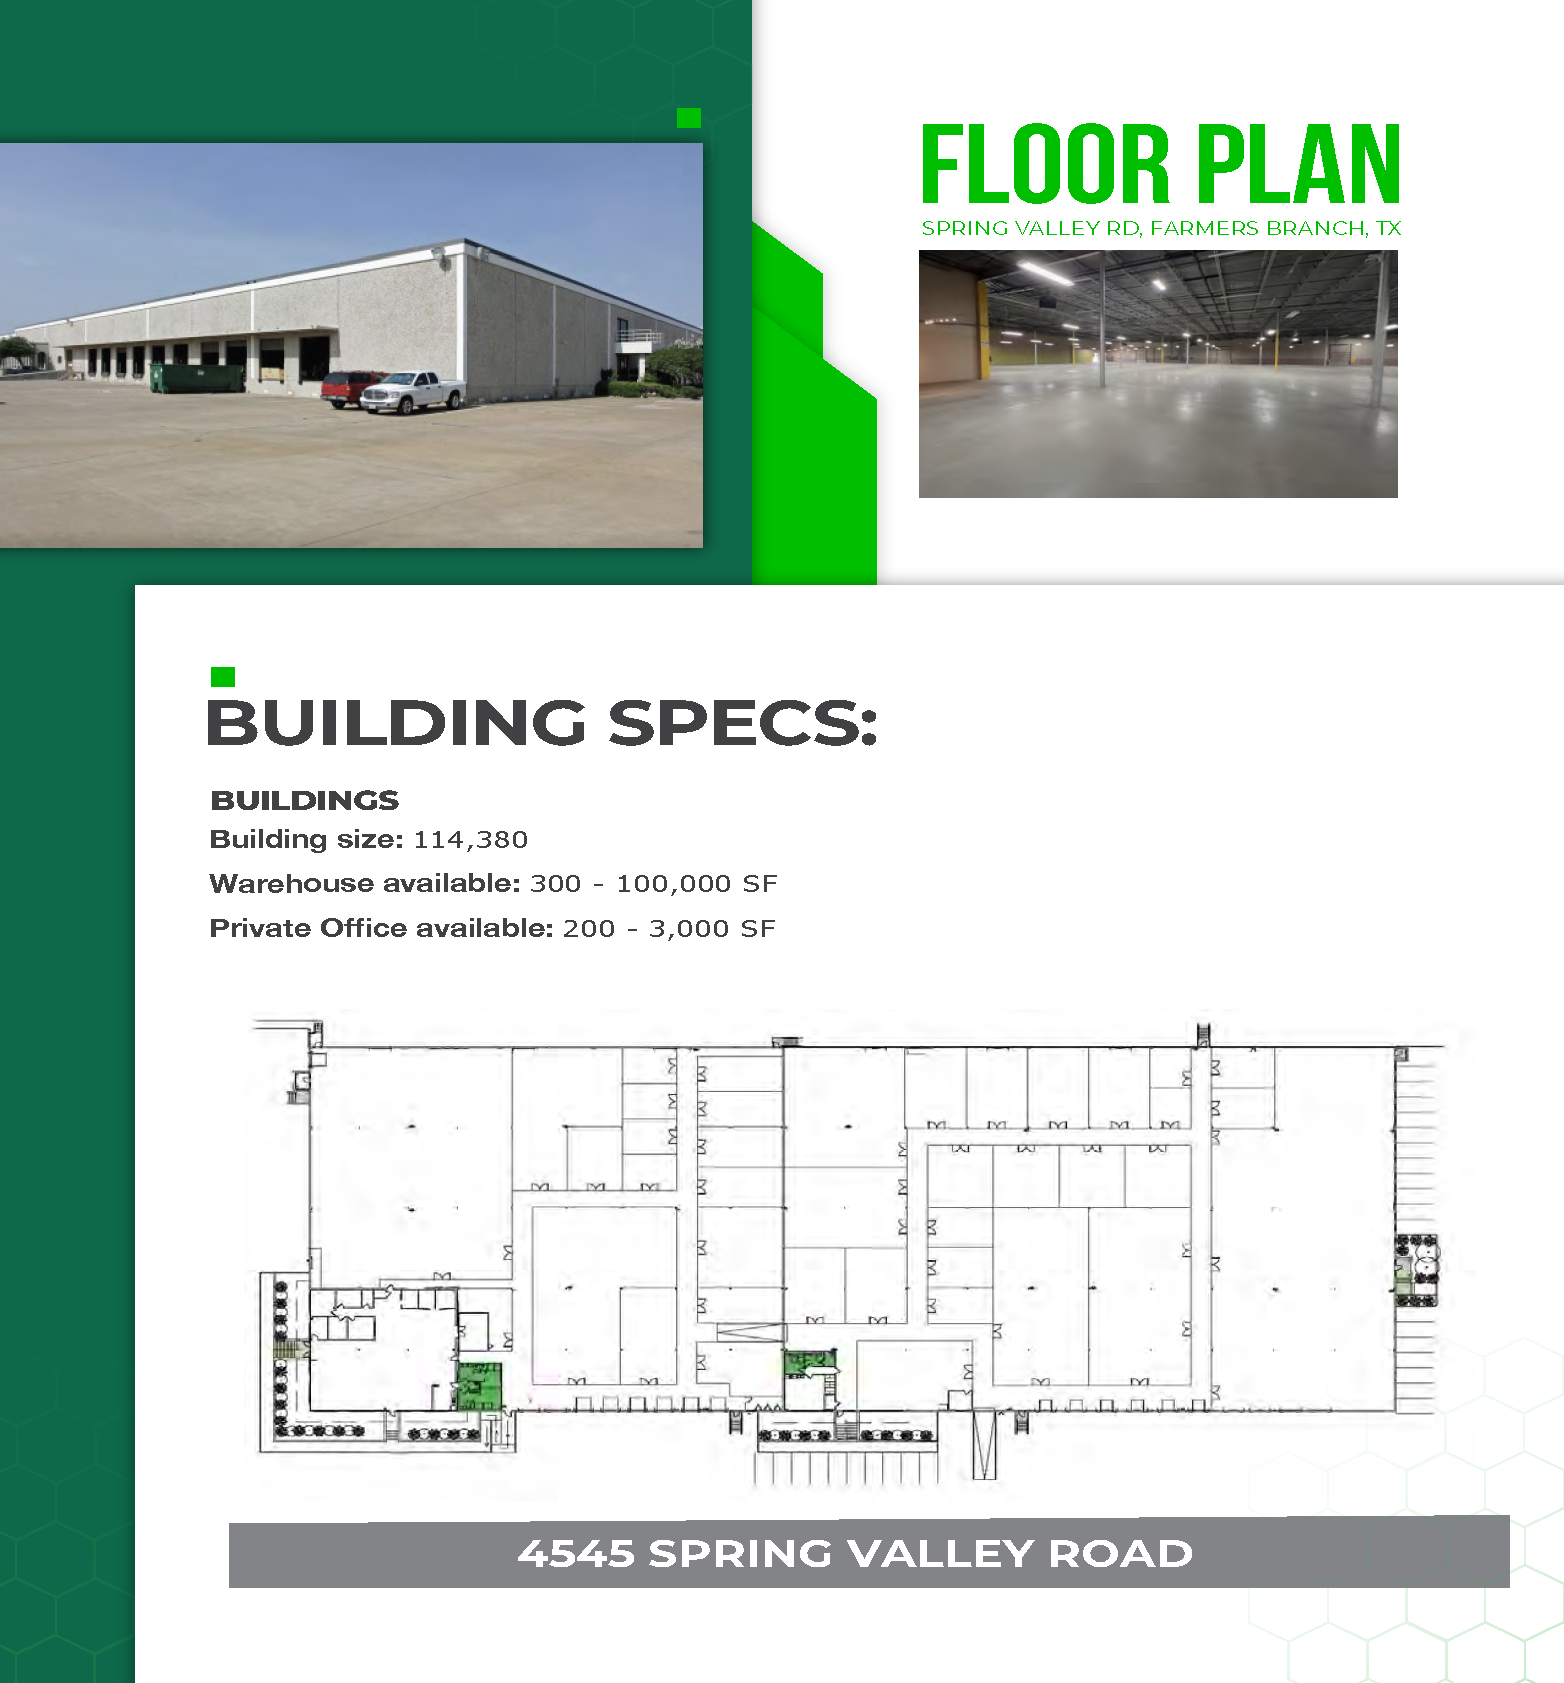 TX_Farmers Branch_4545 Spring Valley Rd_Page_2.png